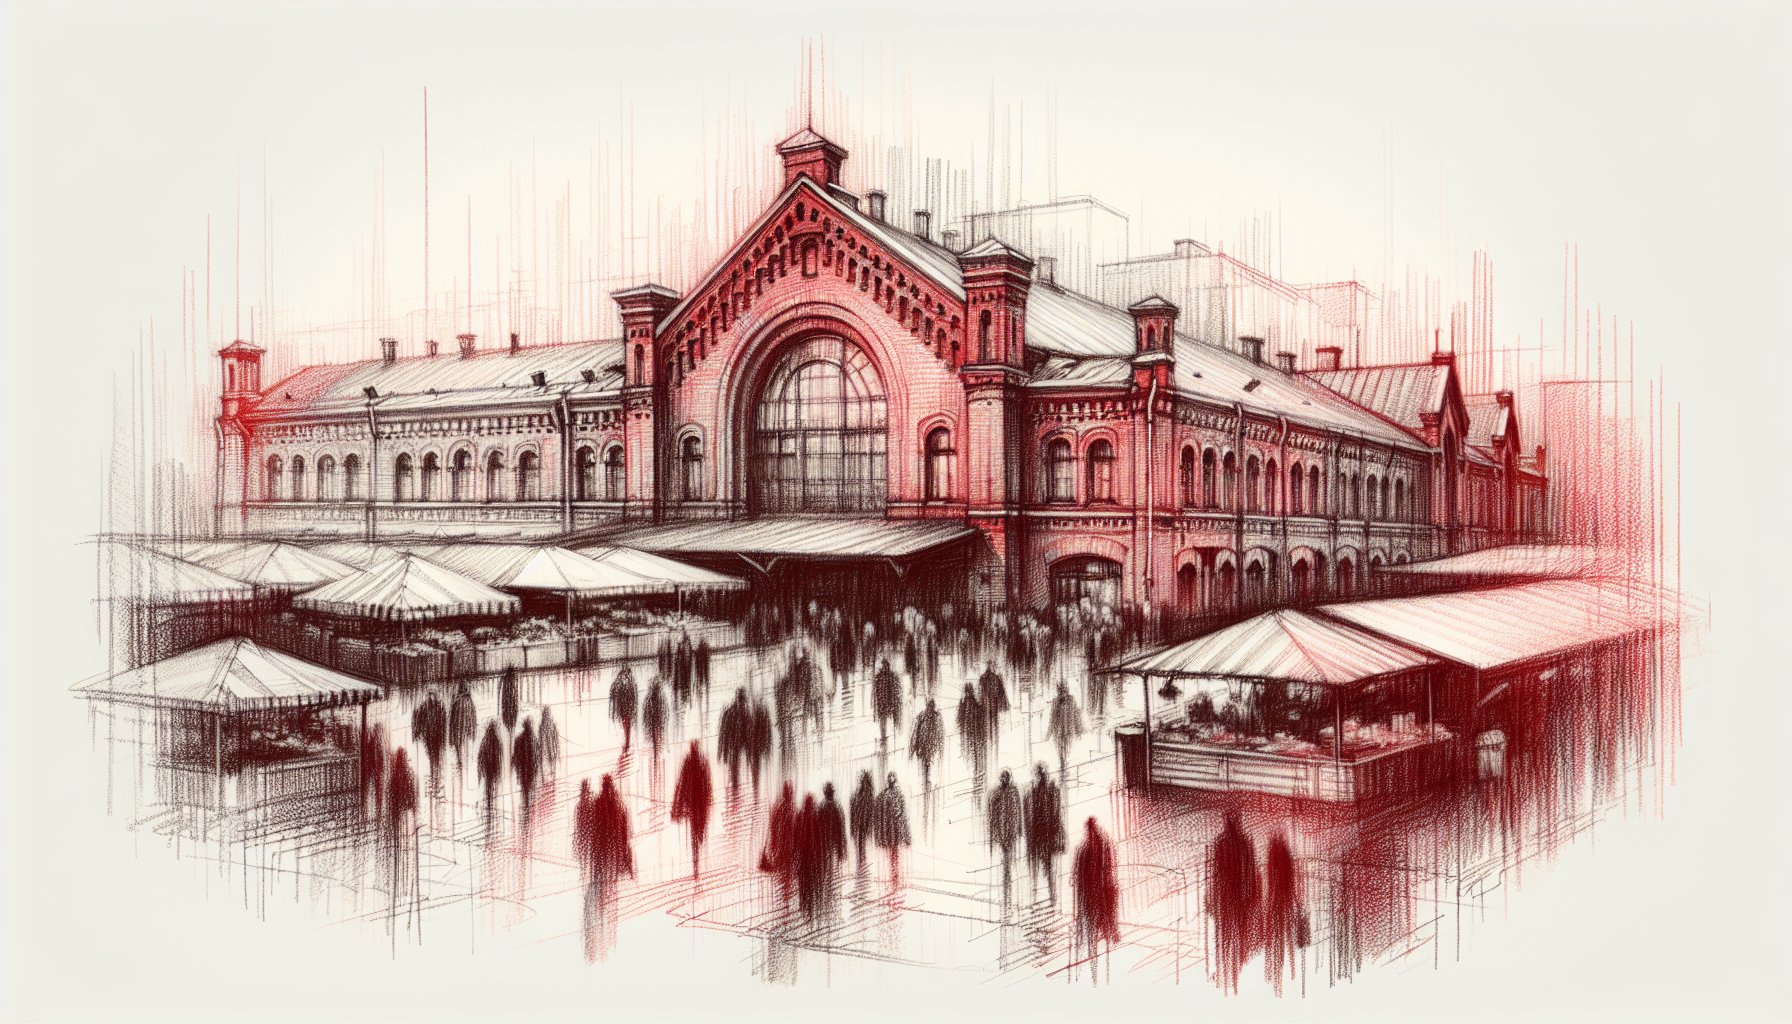 The charm of Helsinki's old market hall